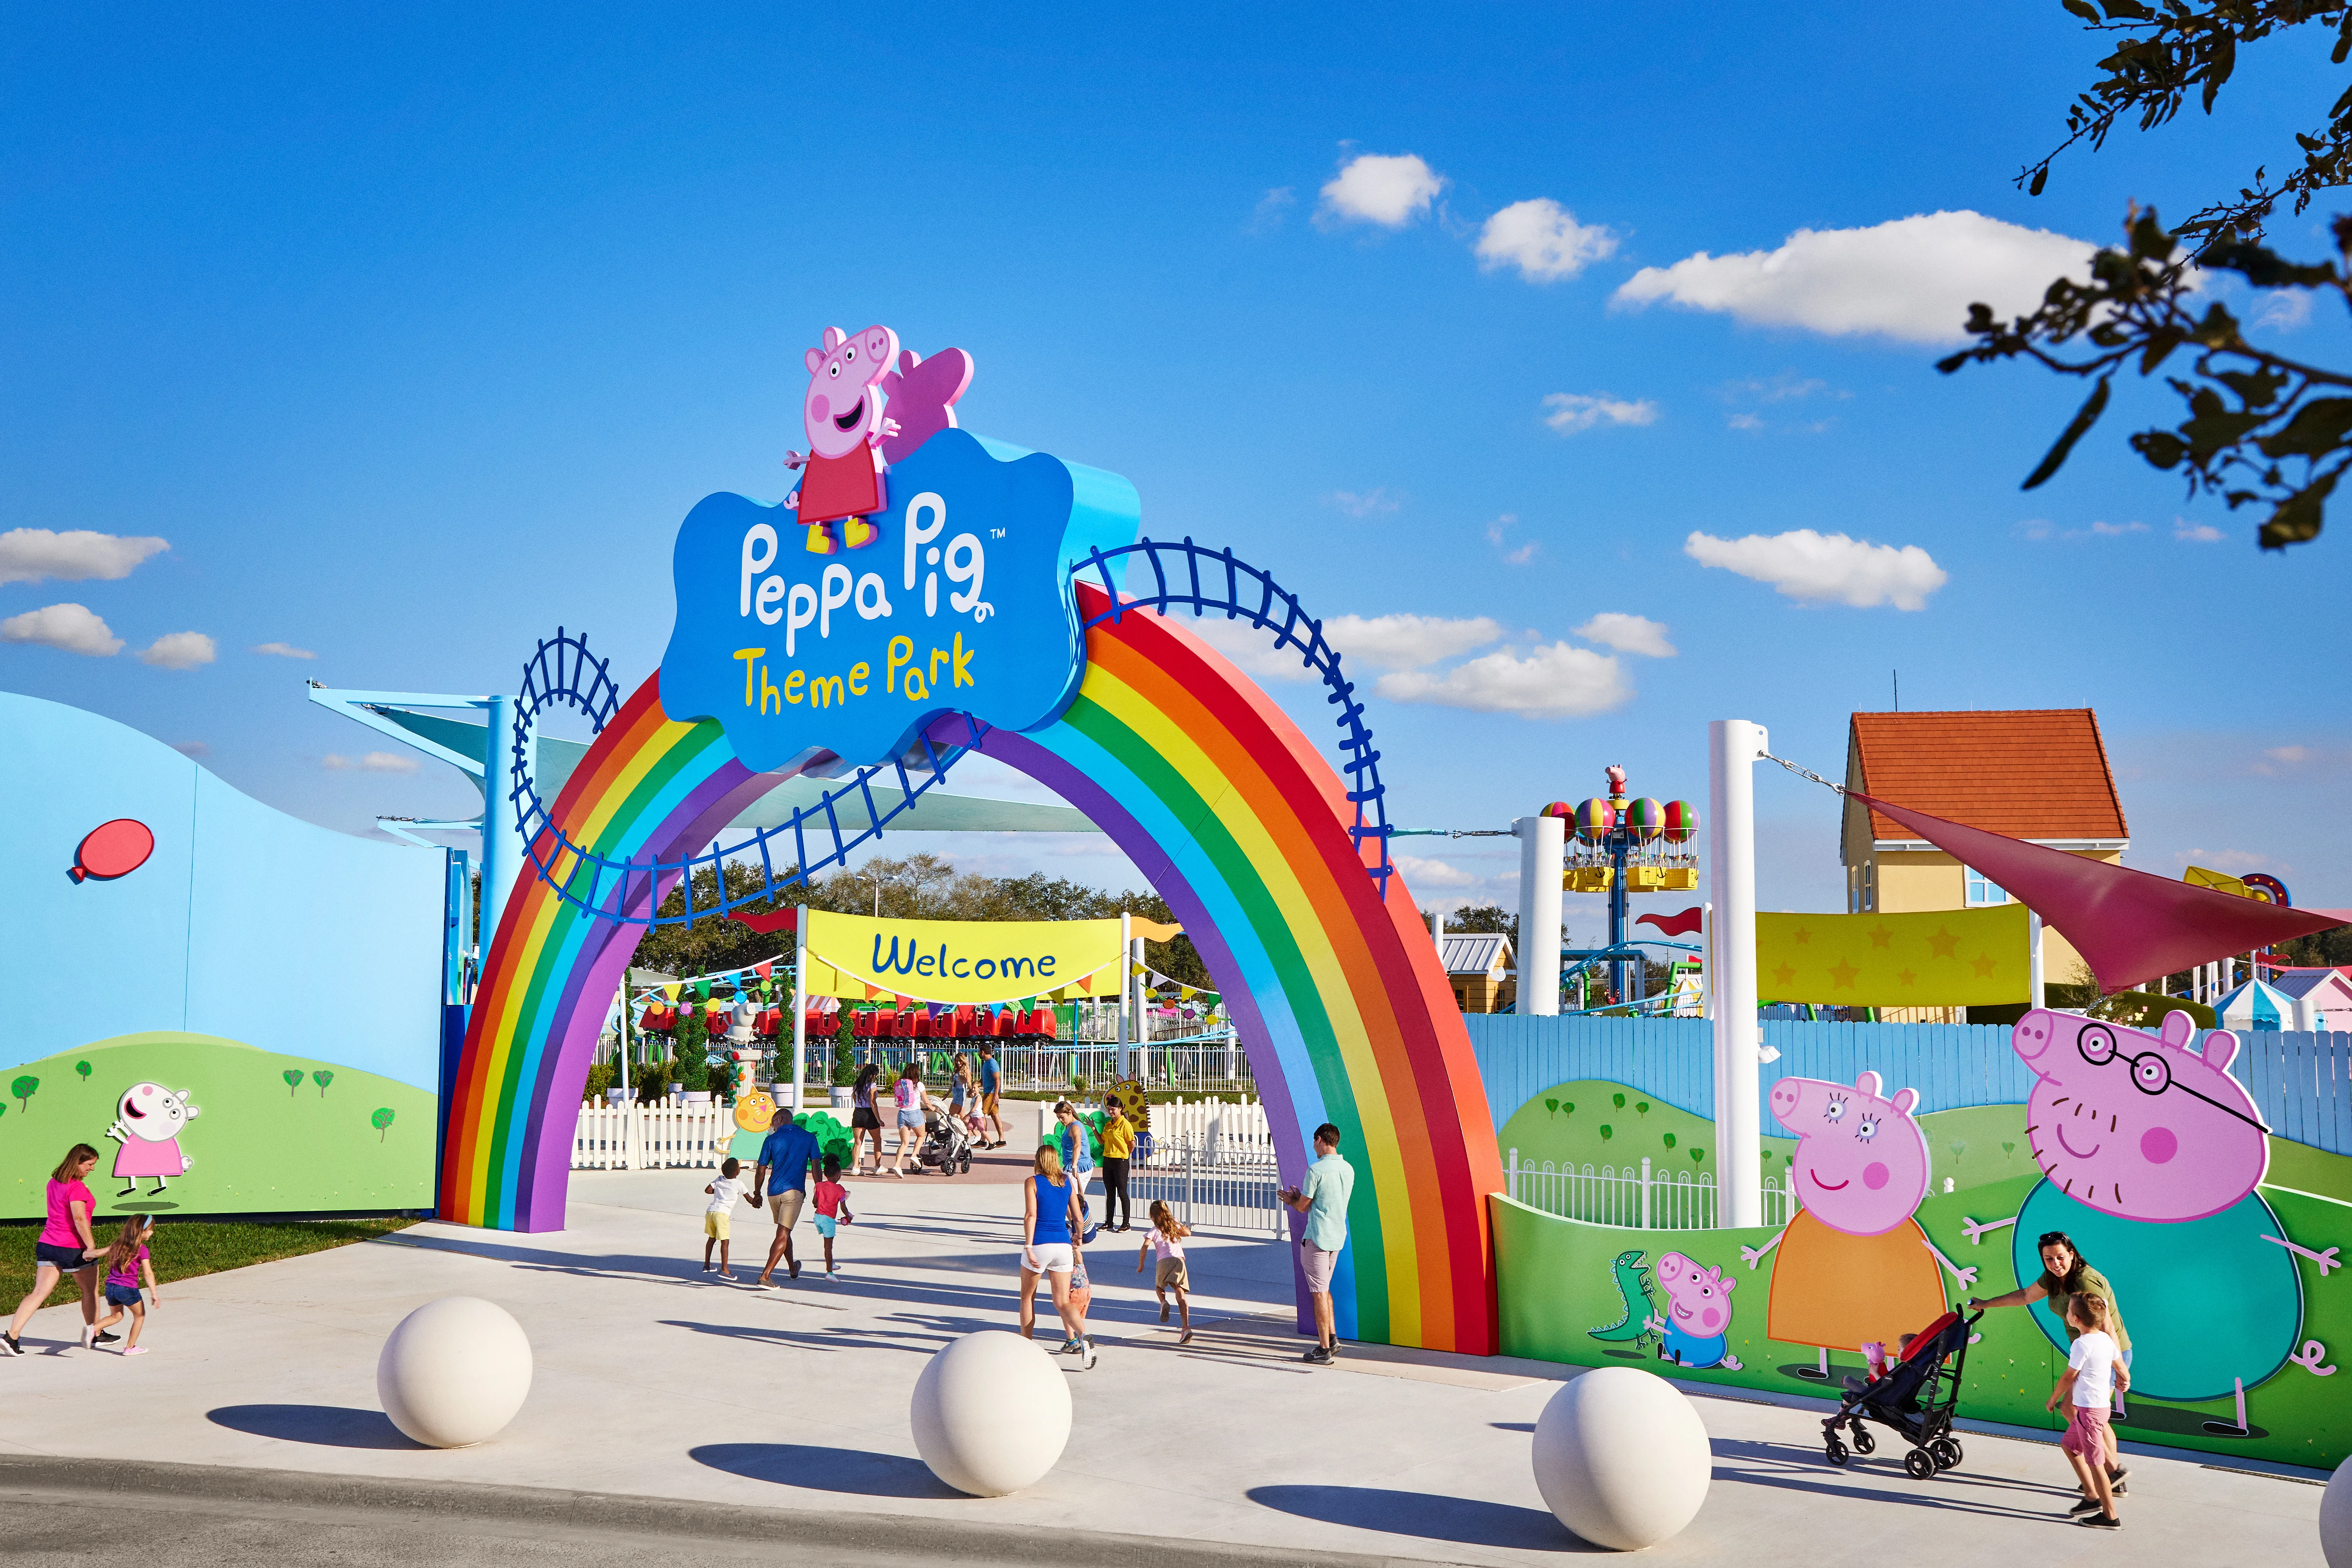 The World's First Peppa Pig Theme Park is NOW OPEN!